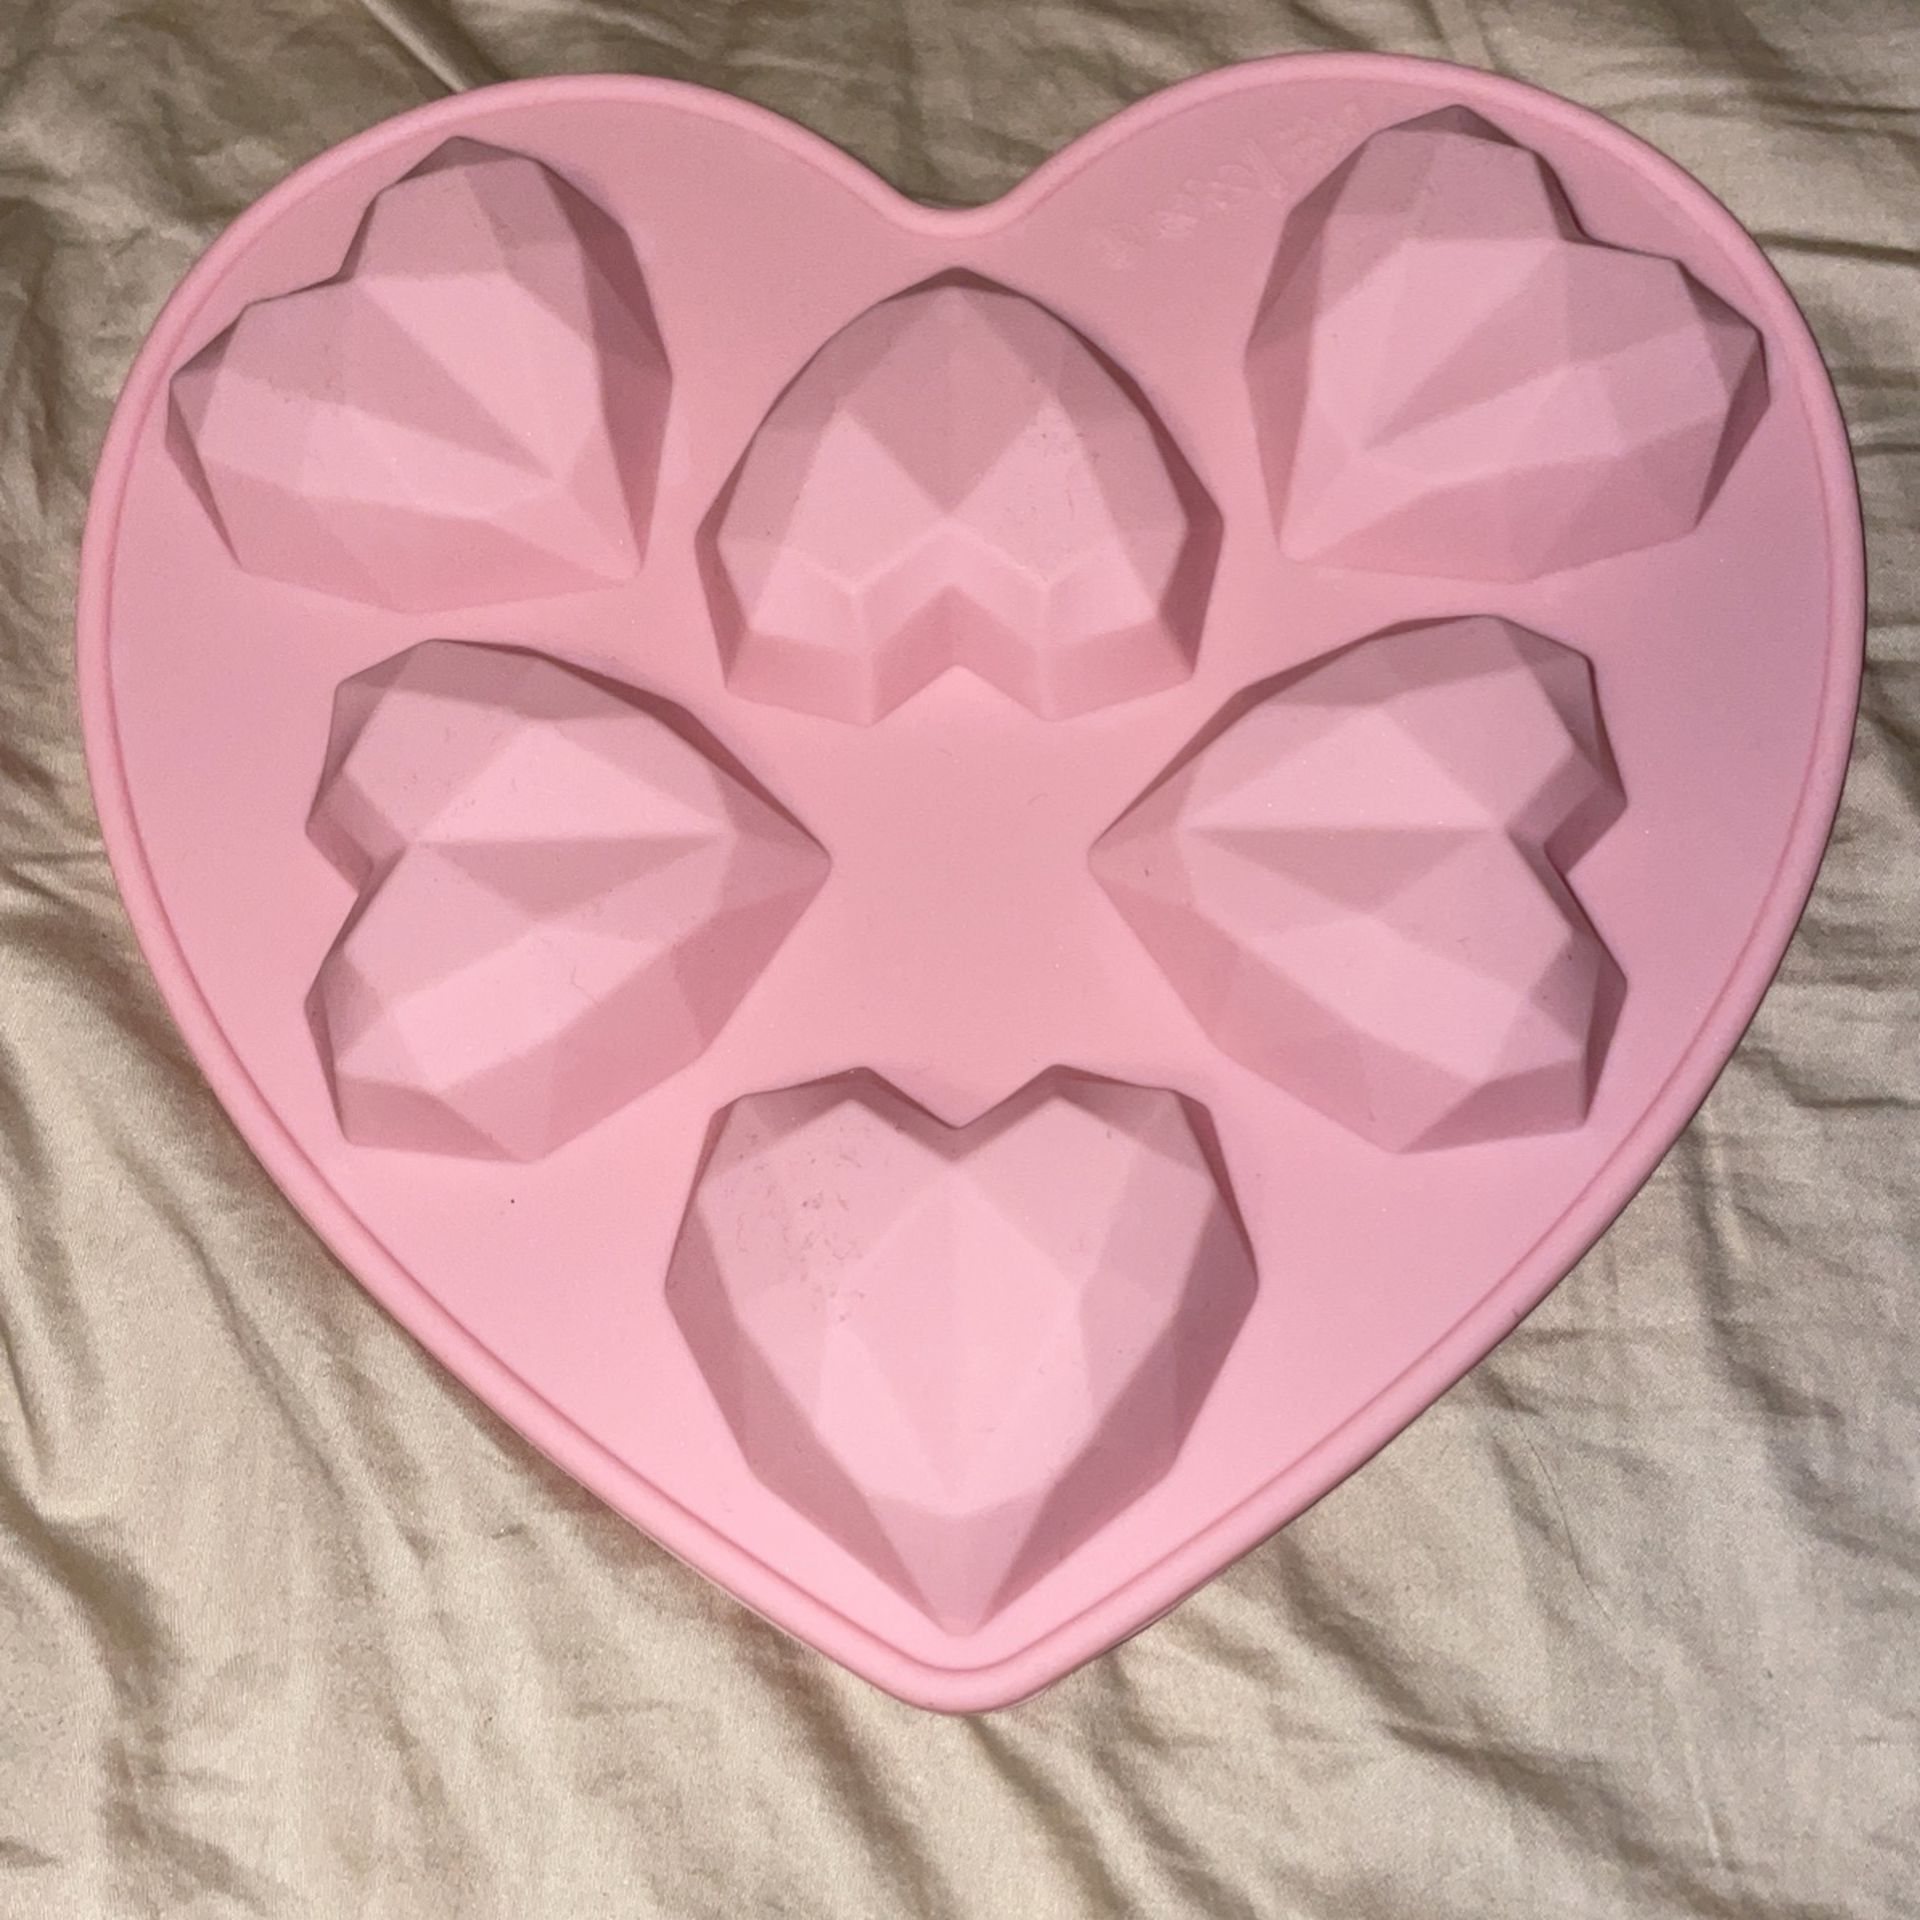 Silicon Heart Molds 